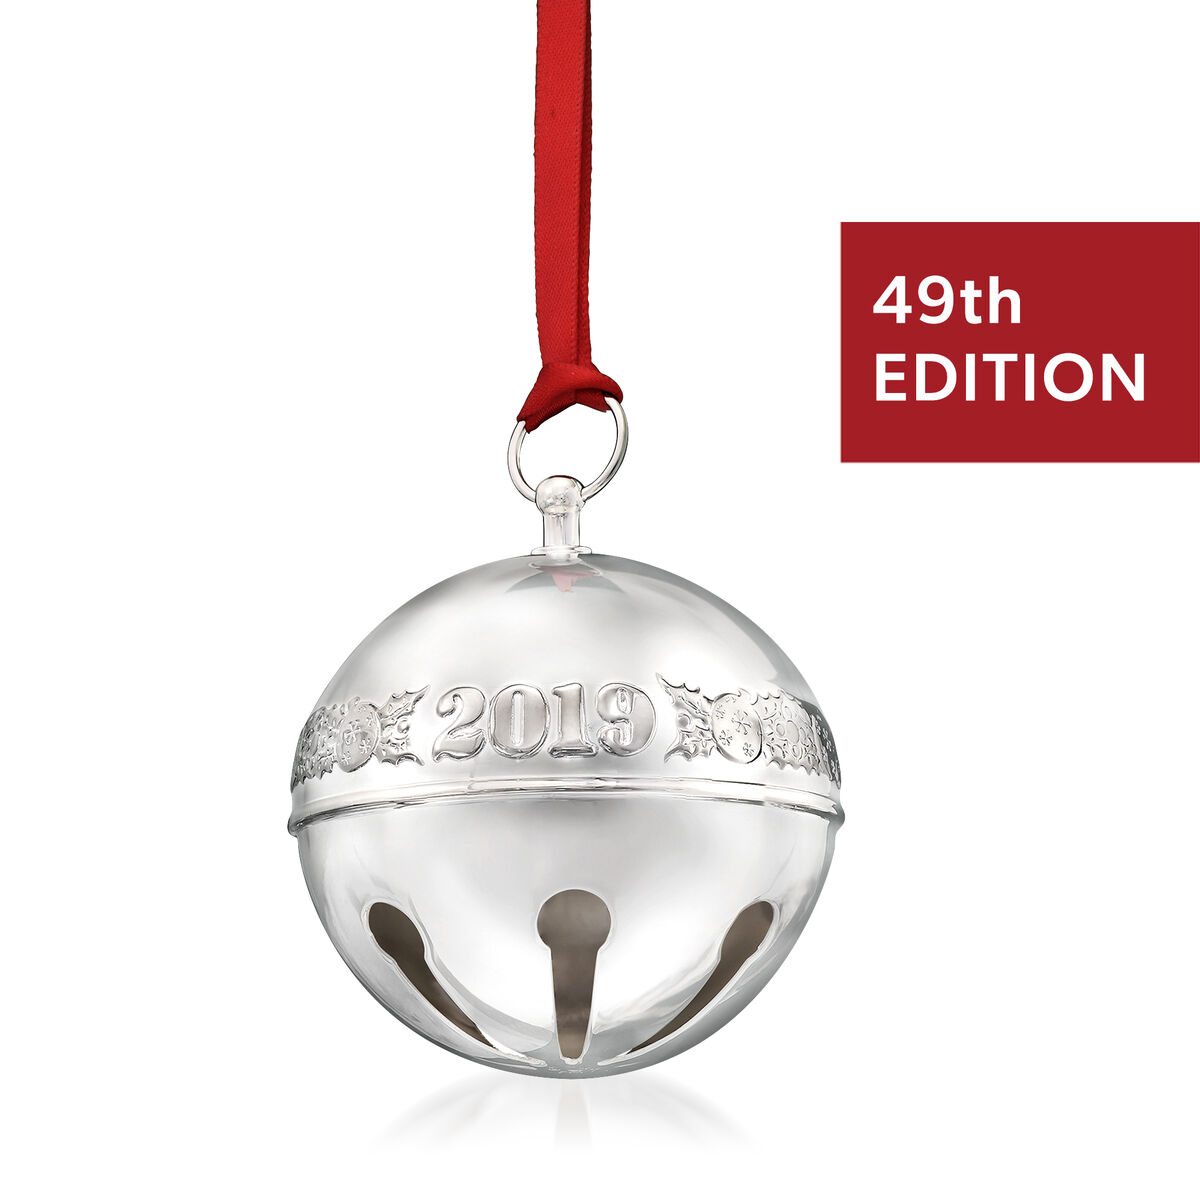 Wallace 2019 Annual Silver Plate Sleigh Bell Ornament - 49th Edition